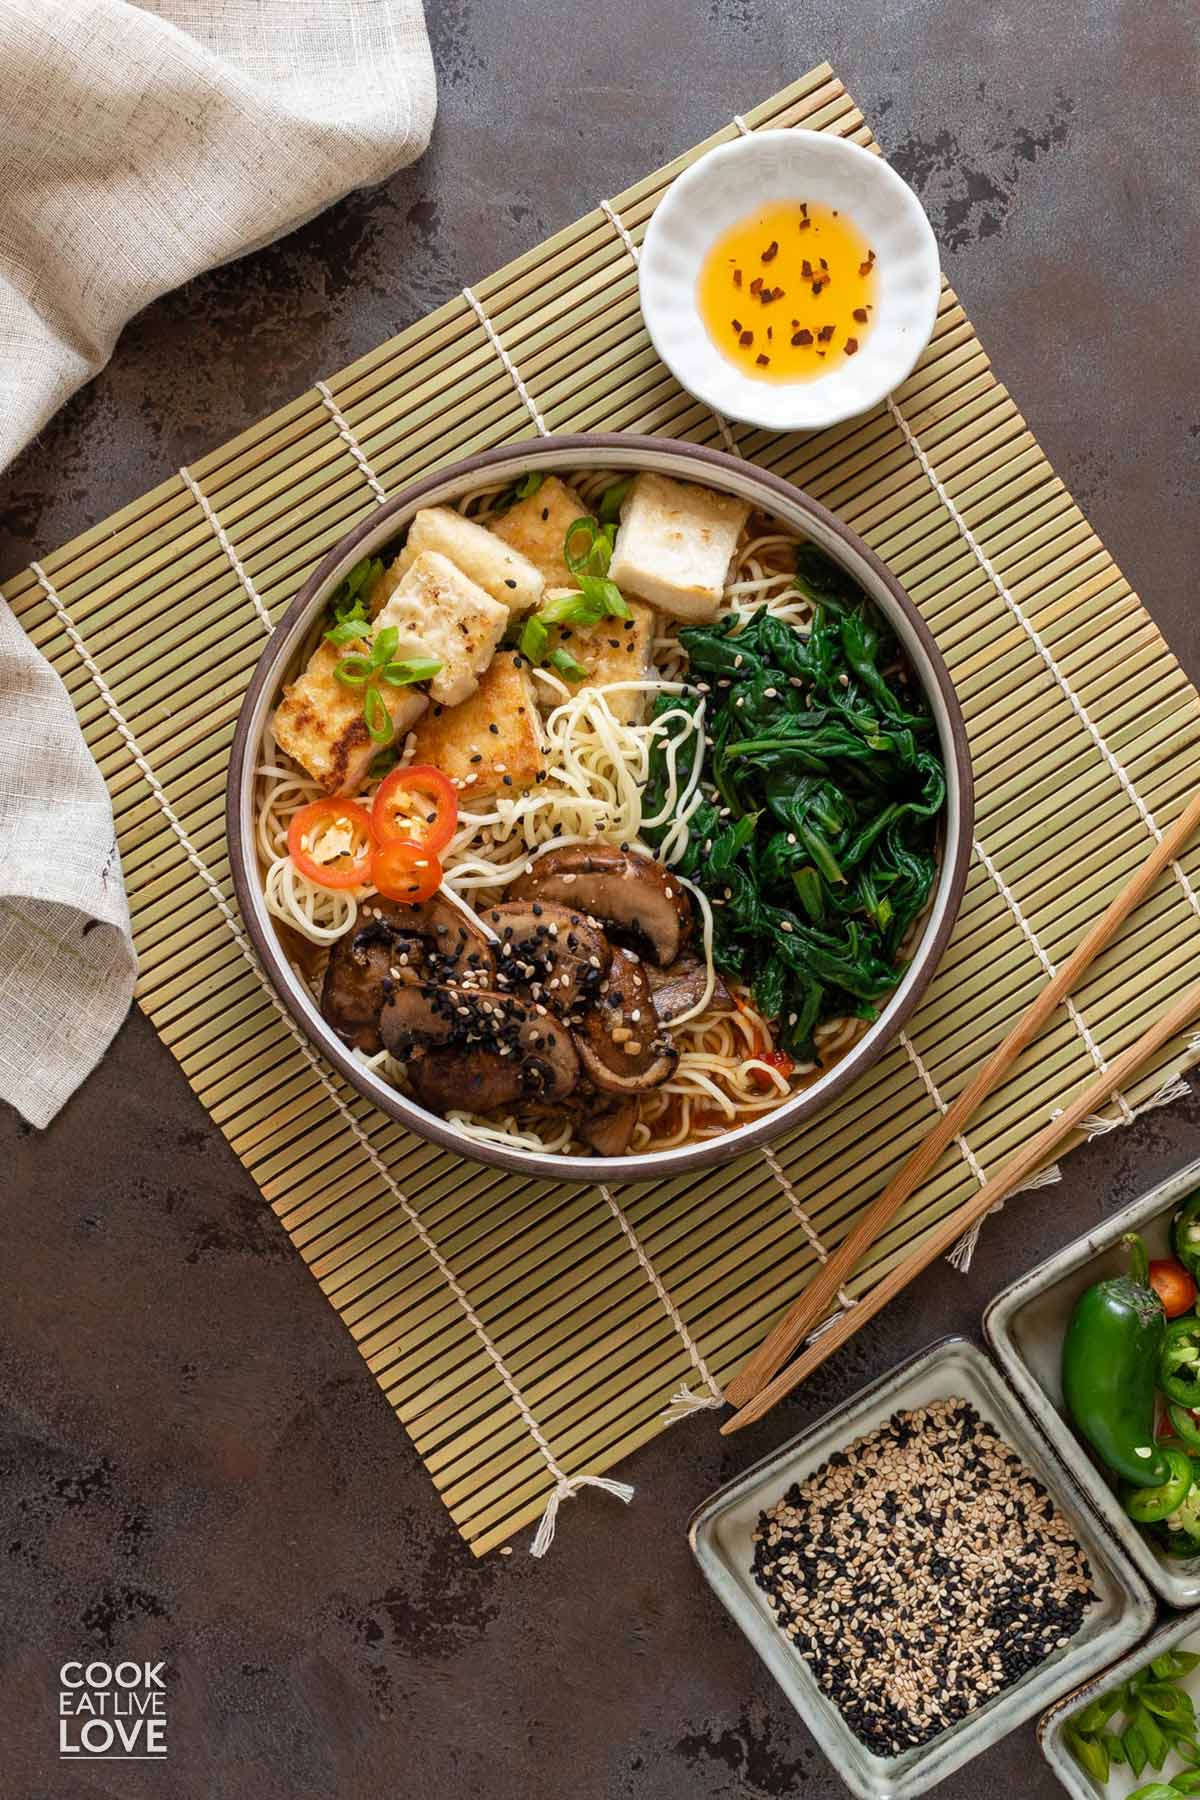 A bowl of vegan tofu ramen in spicy miso broth on the table.